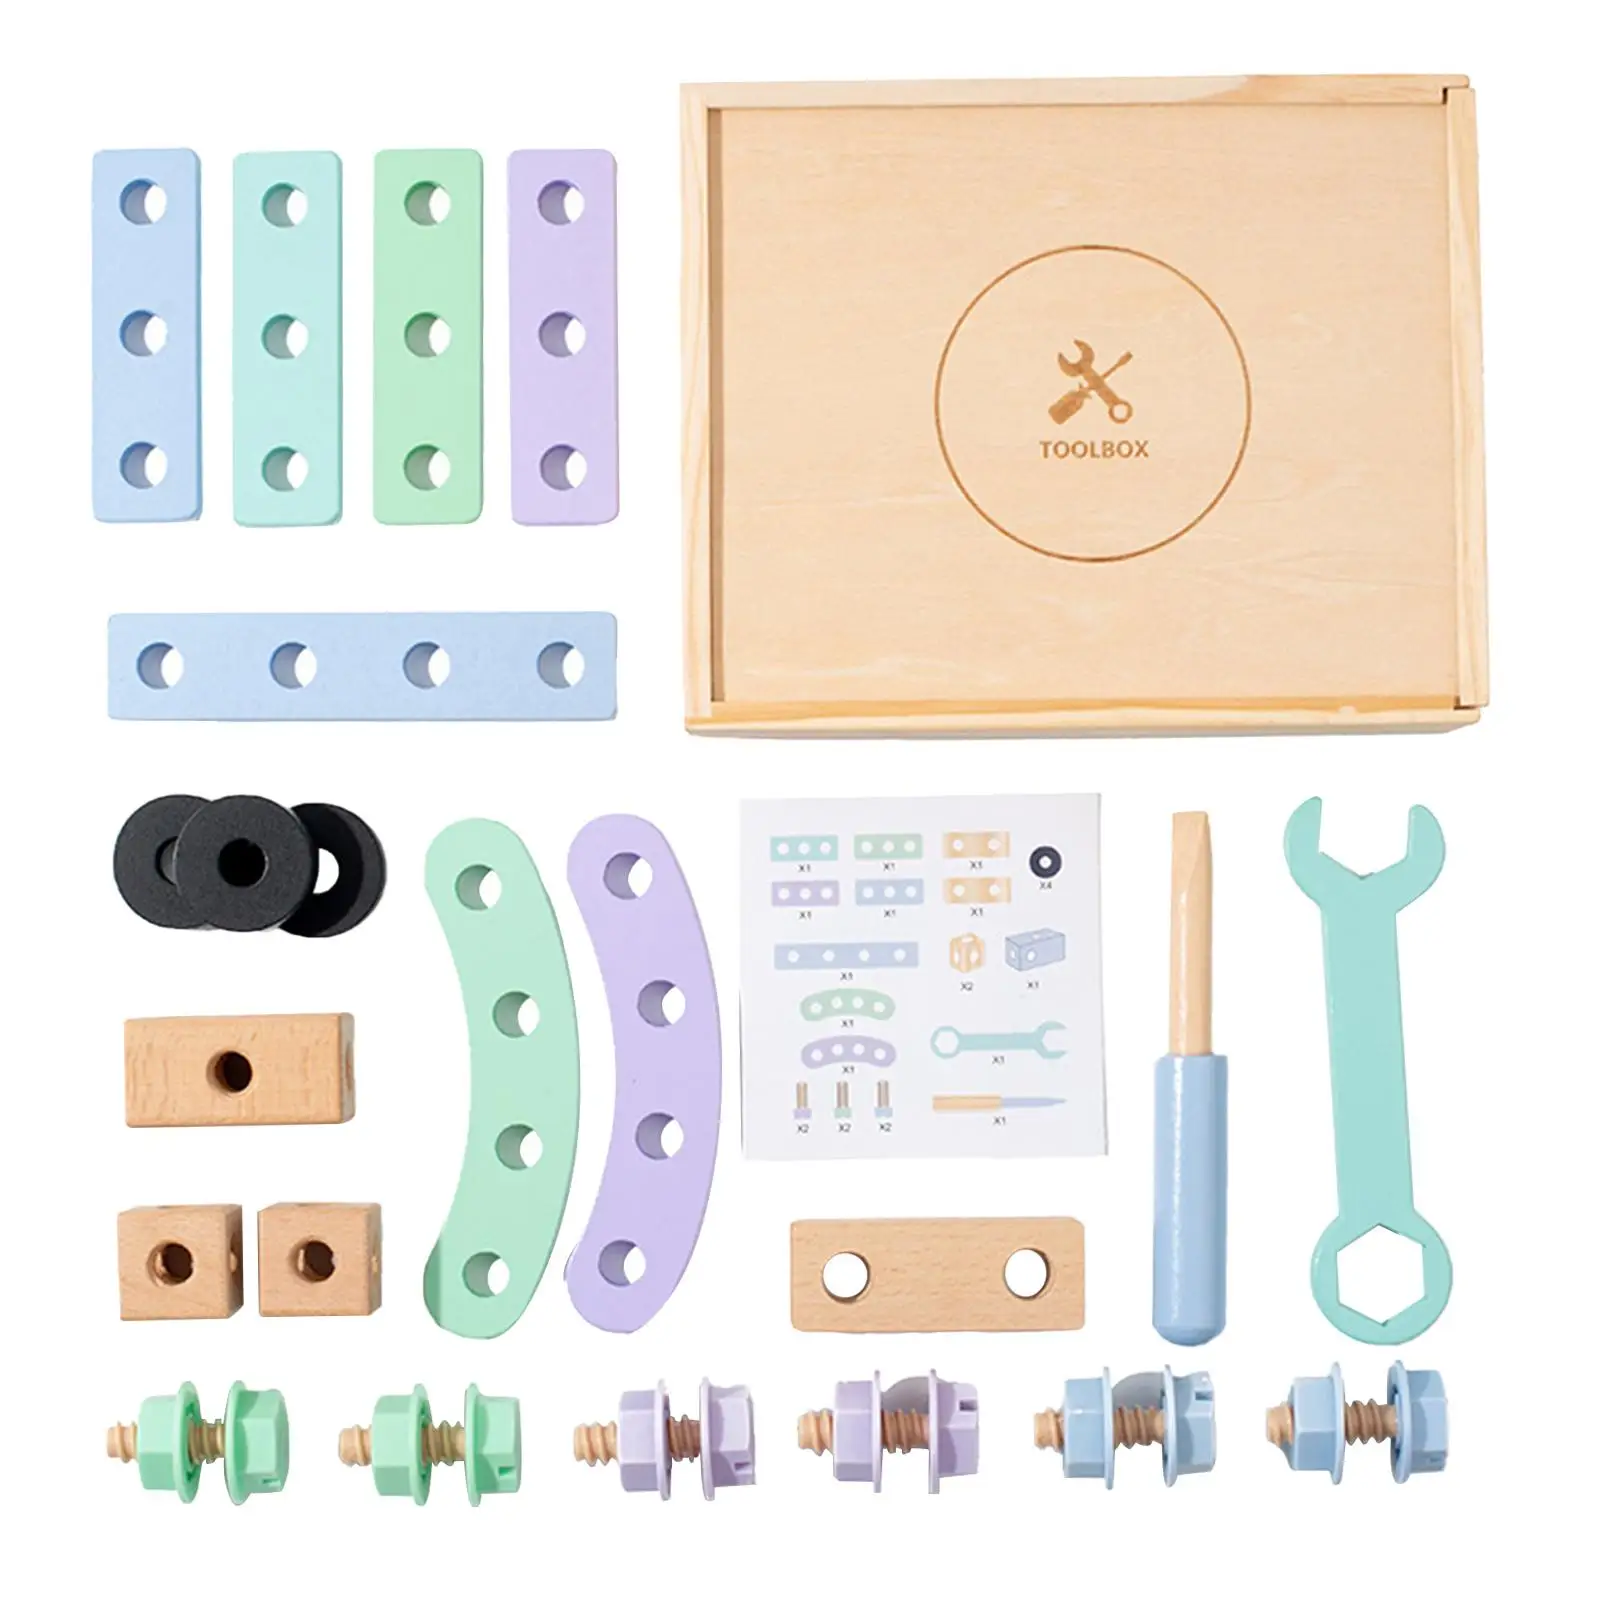 Wooden Repair Tool Box Toy Hand Eye Coordination Multifunctional Nut Screw Disassembly Learning Toy for Baby Children Girls Boys